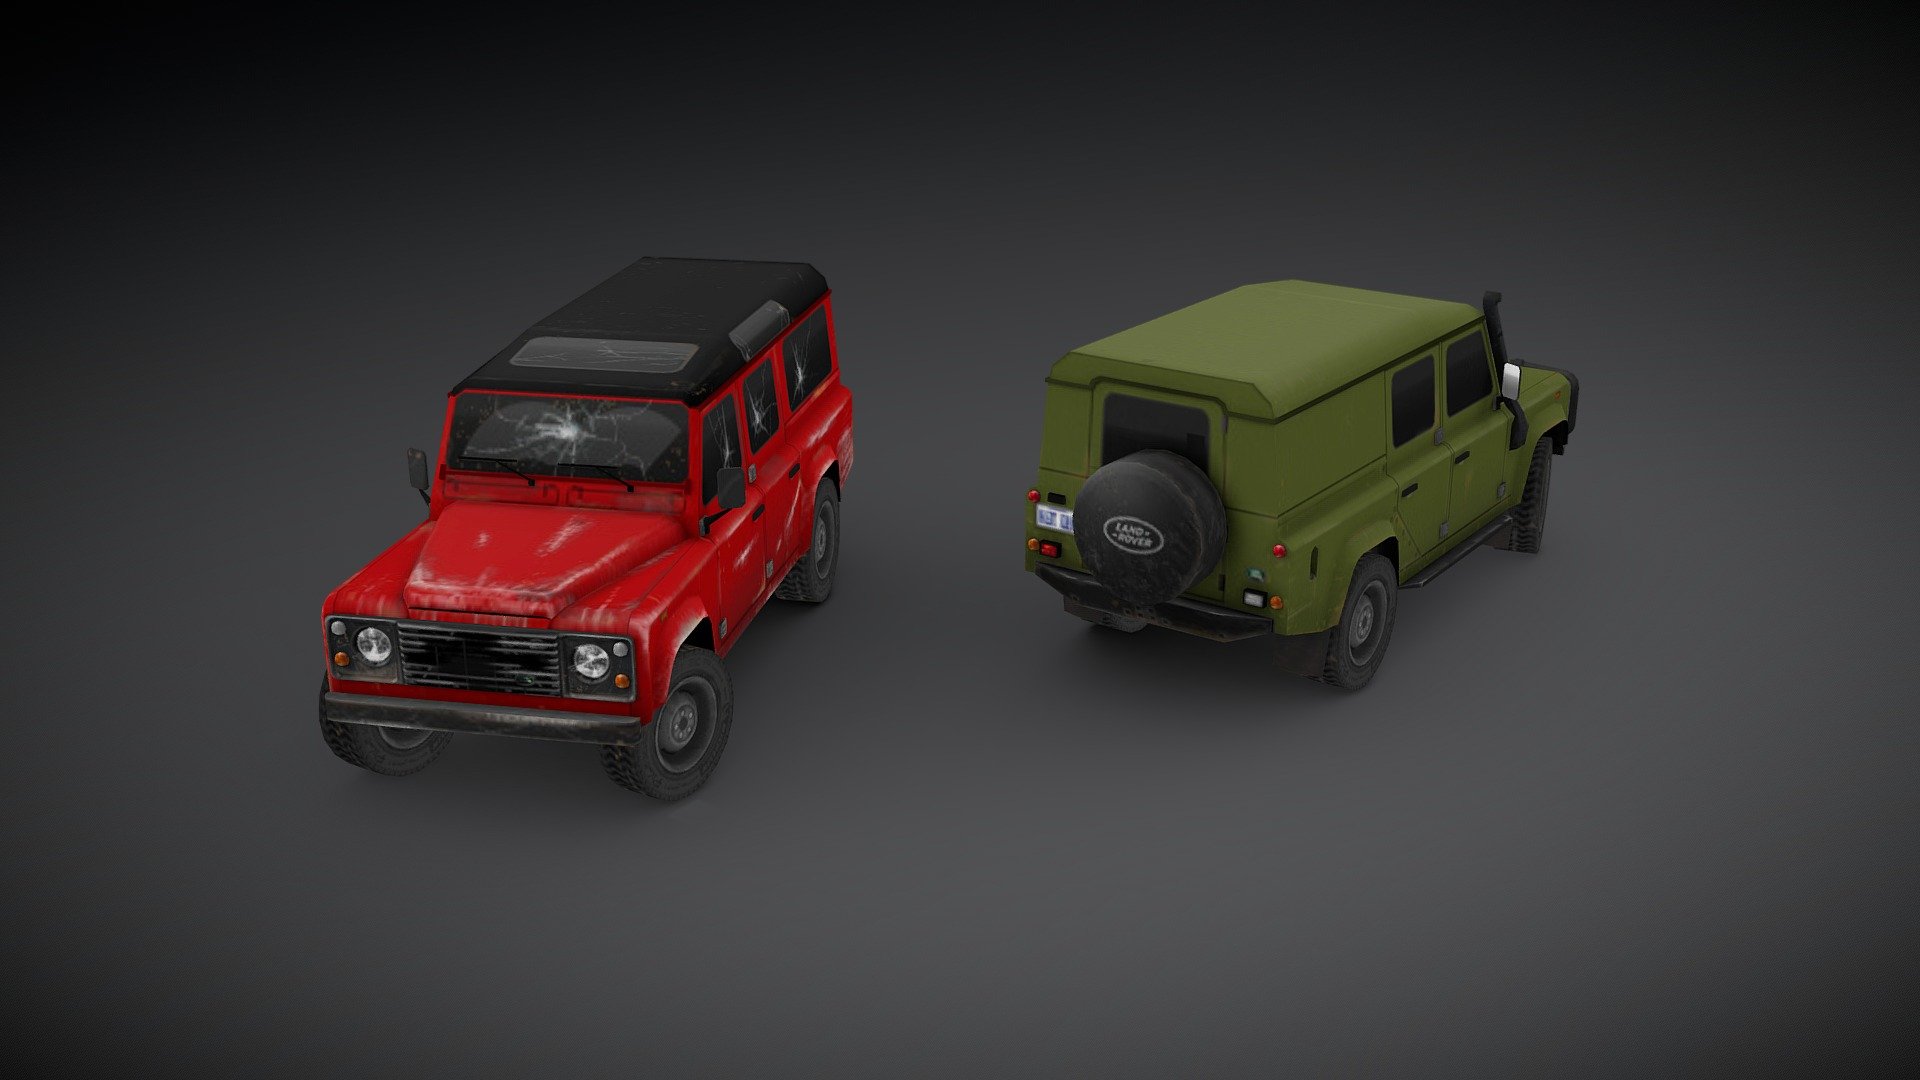 A showcase of a 1989 Land Rover Defender I’ve made for project ZOMBOID, med poly but with a high detail texture, optimized for game engine. This version is not a 100% true to the original since there are some compromises I’ve had to make to present it here.

You can find the actual version in project ZOMBOID STEAM Workshop 3d model